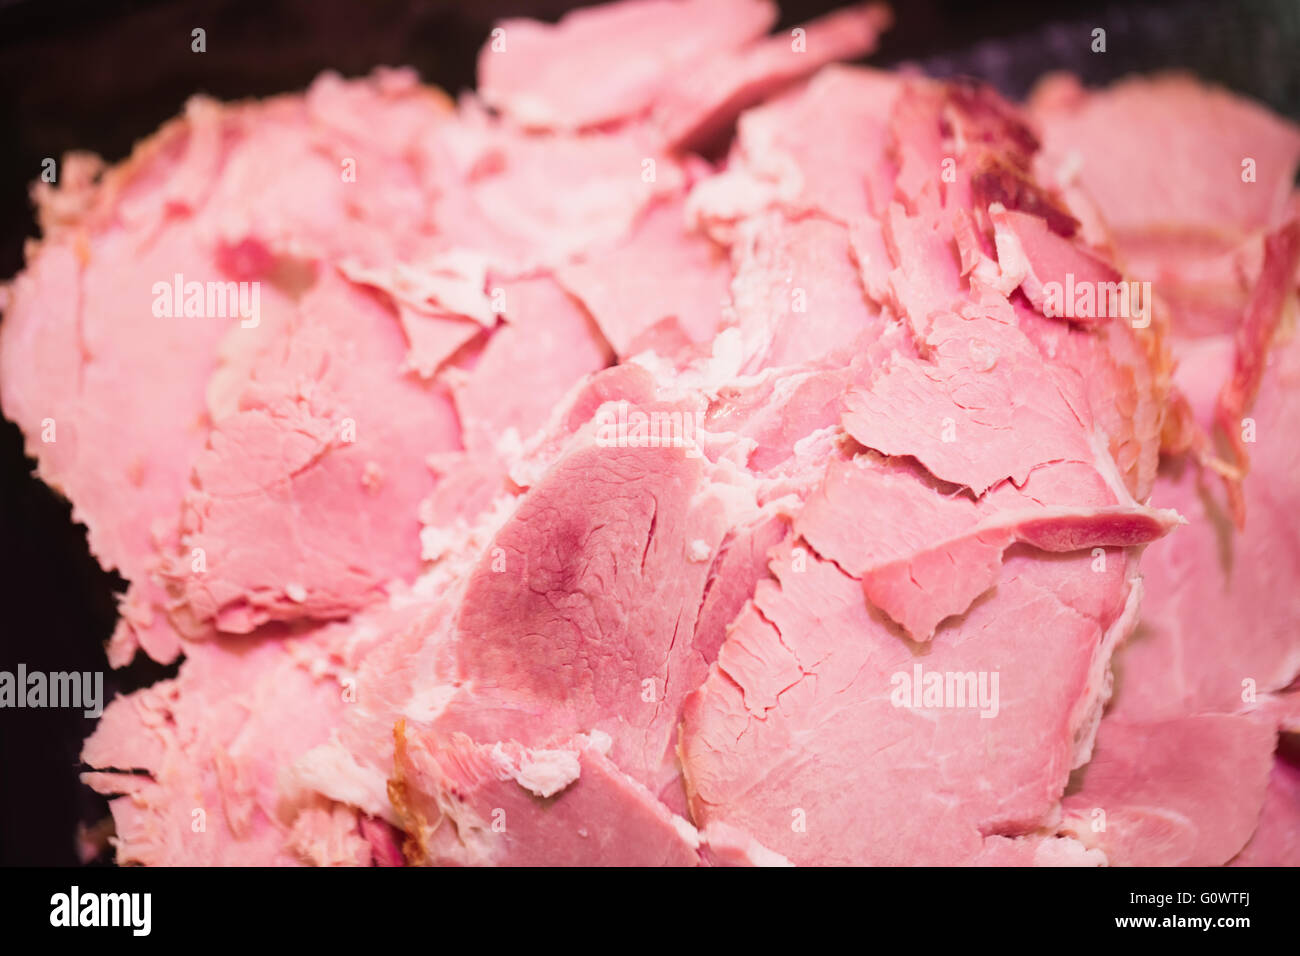 Focus on red meat gathering together Stock Photo